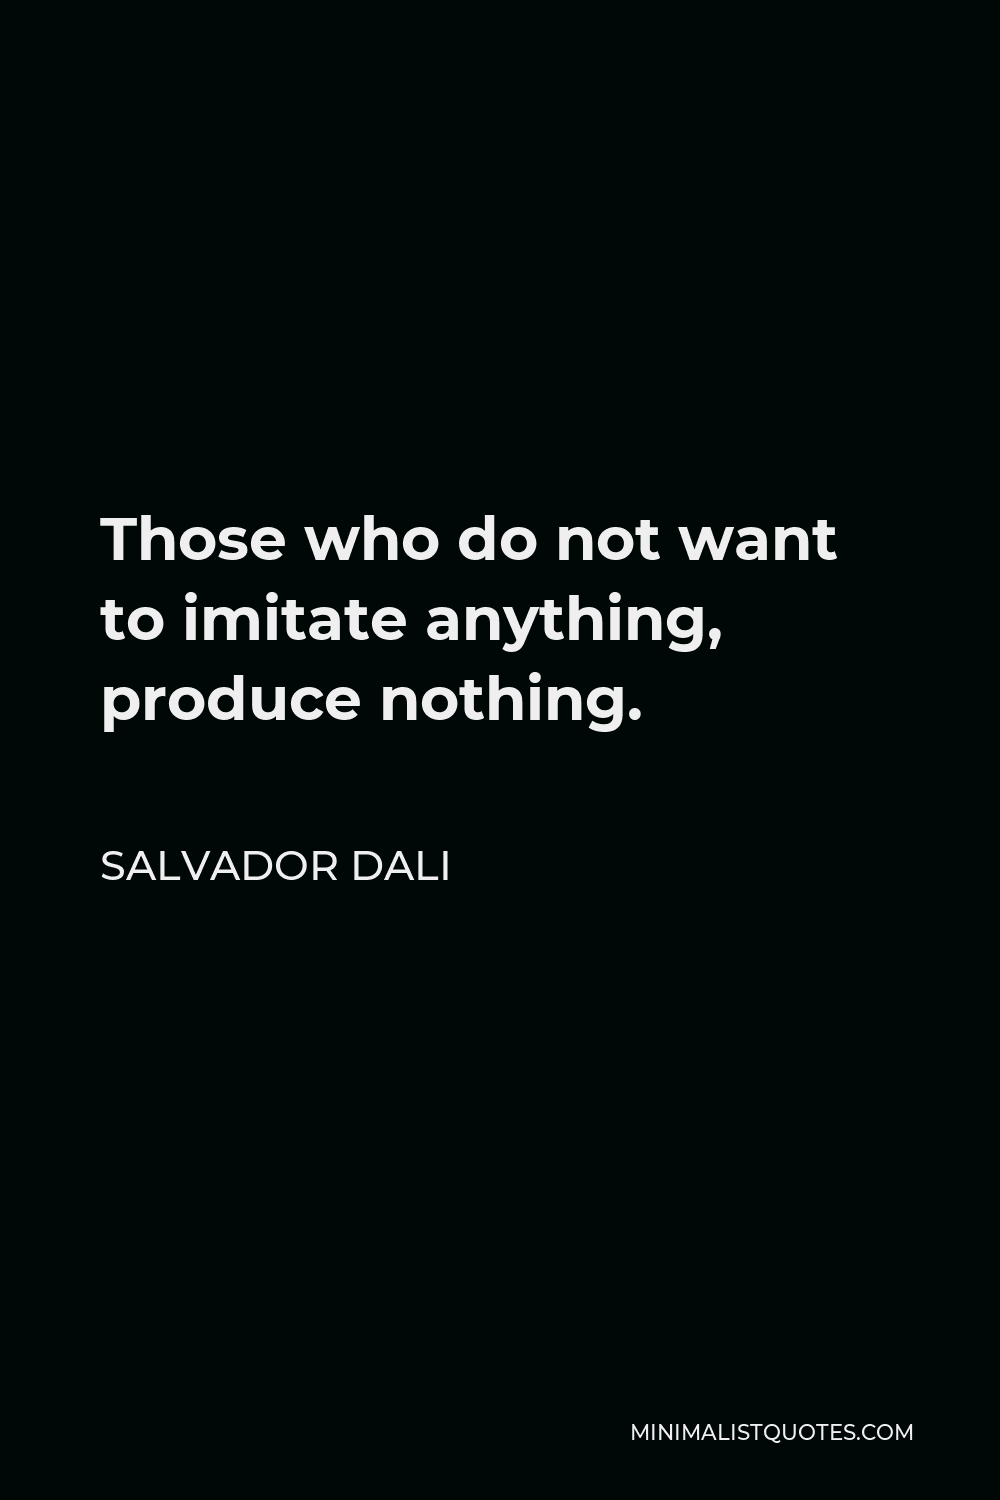 Salvador Dali Quote - Those who do not want to imitate anything, produce nothing.